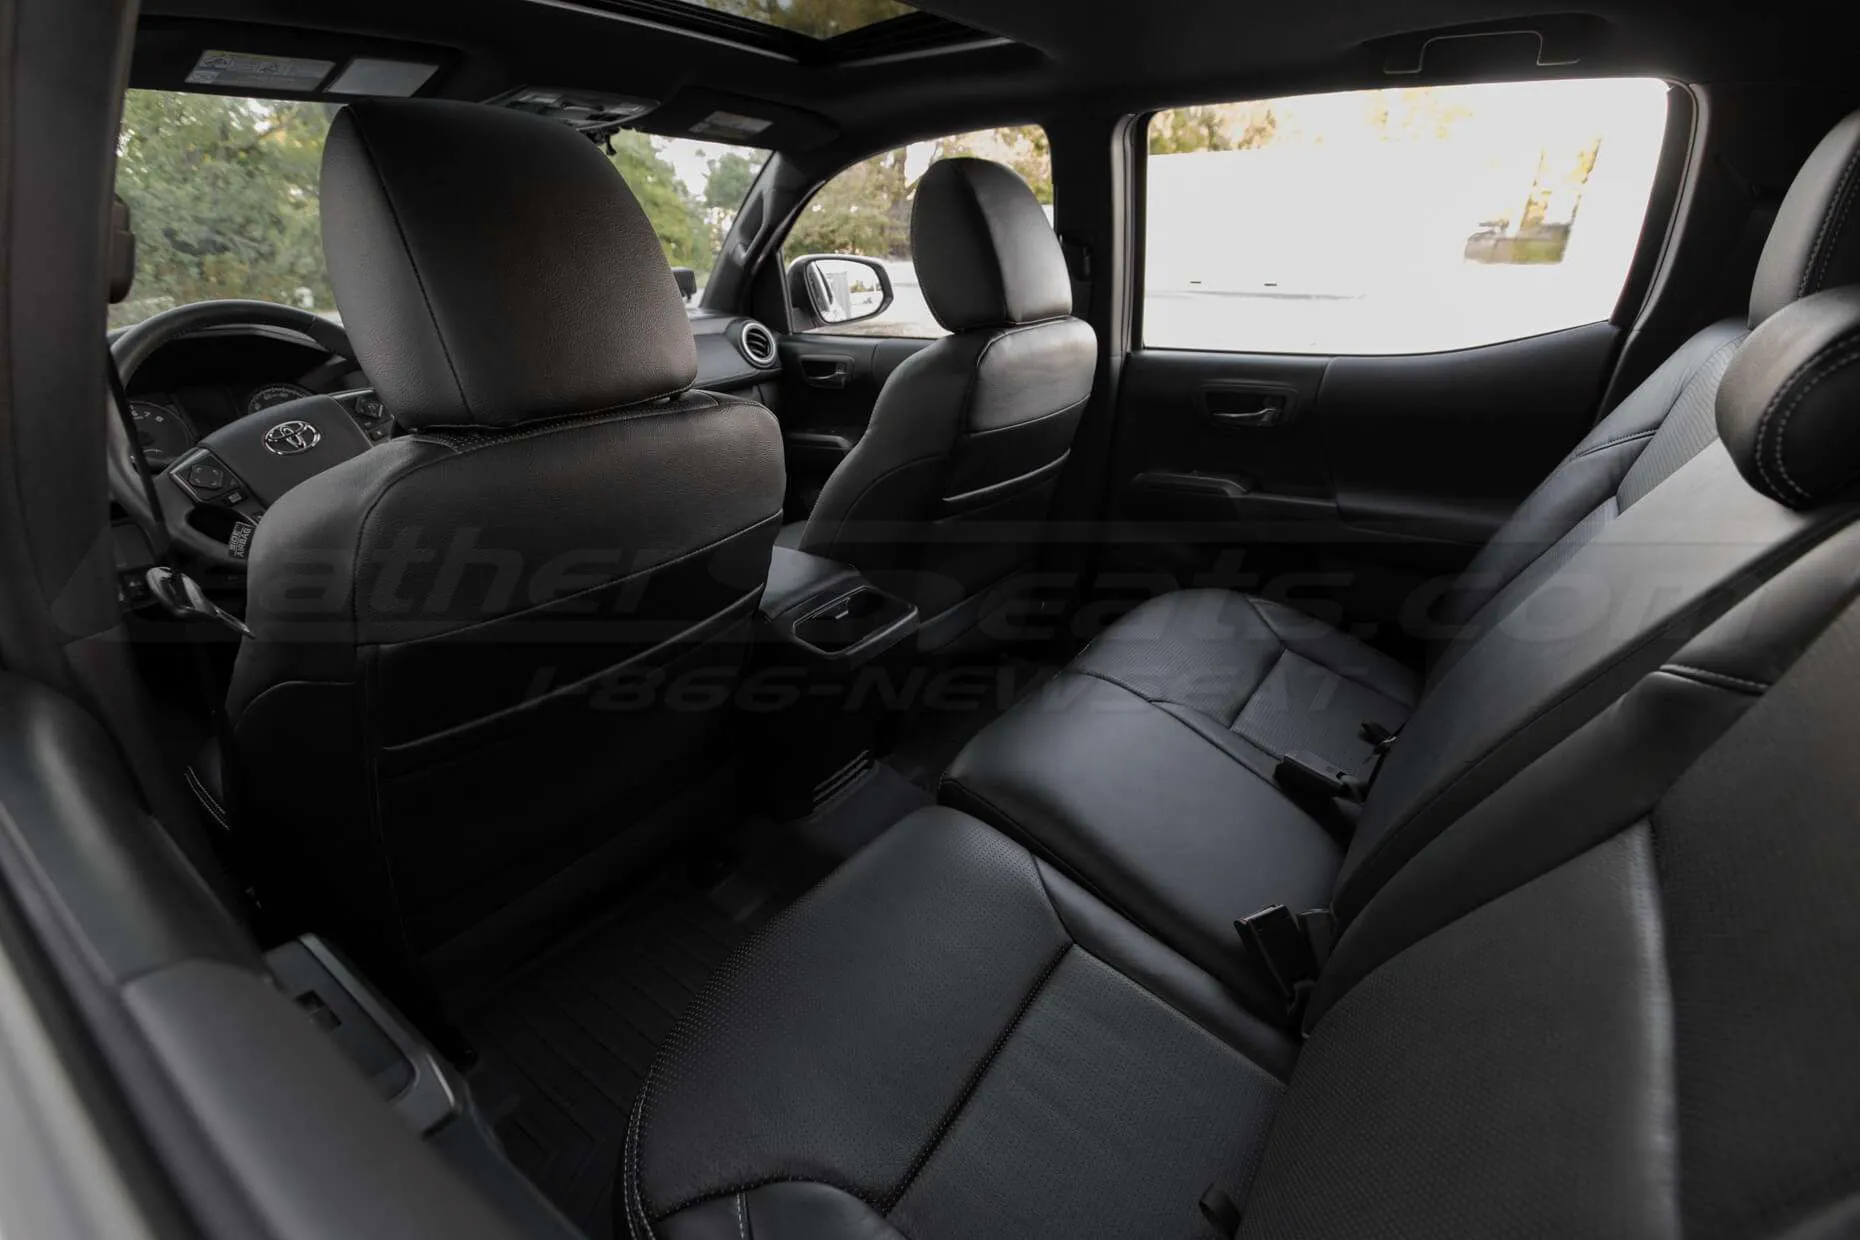 2016-2020 Toyota Tacoma Leather Seats - Black - Installed - Back view of front seats